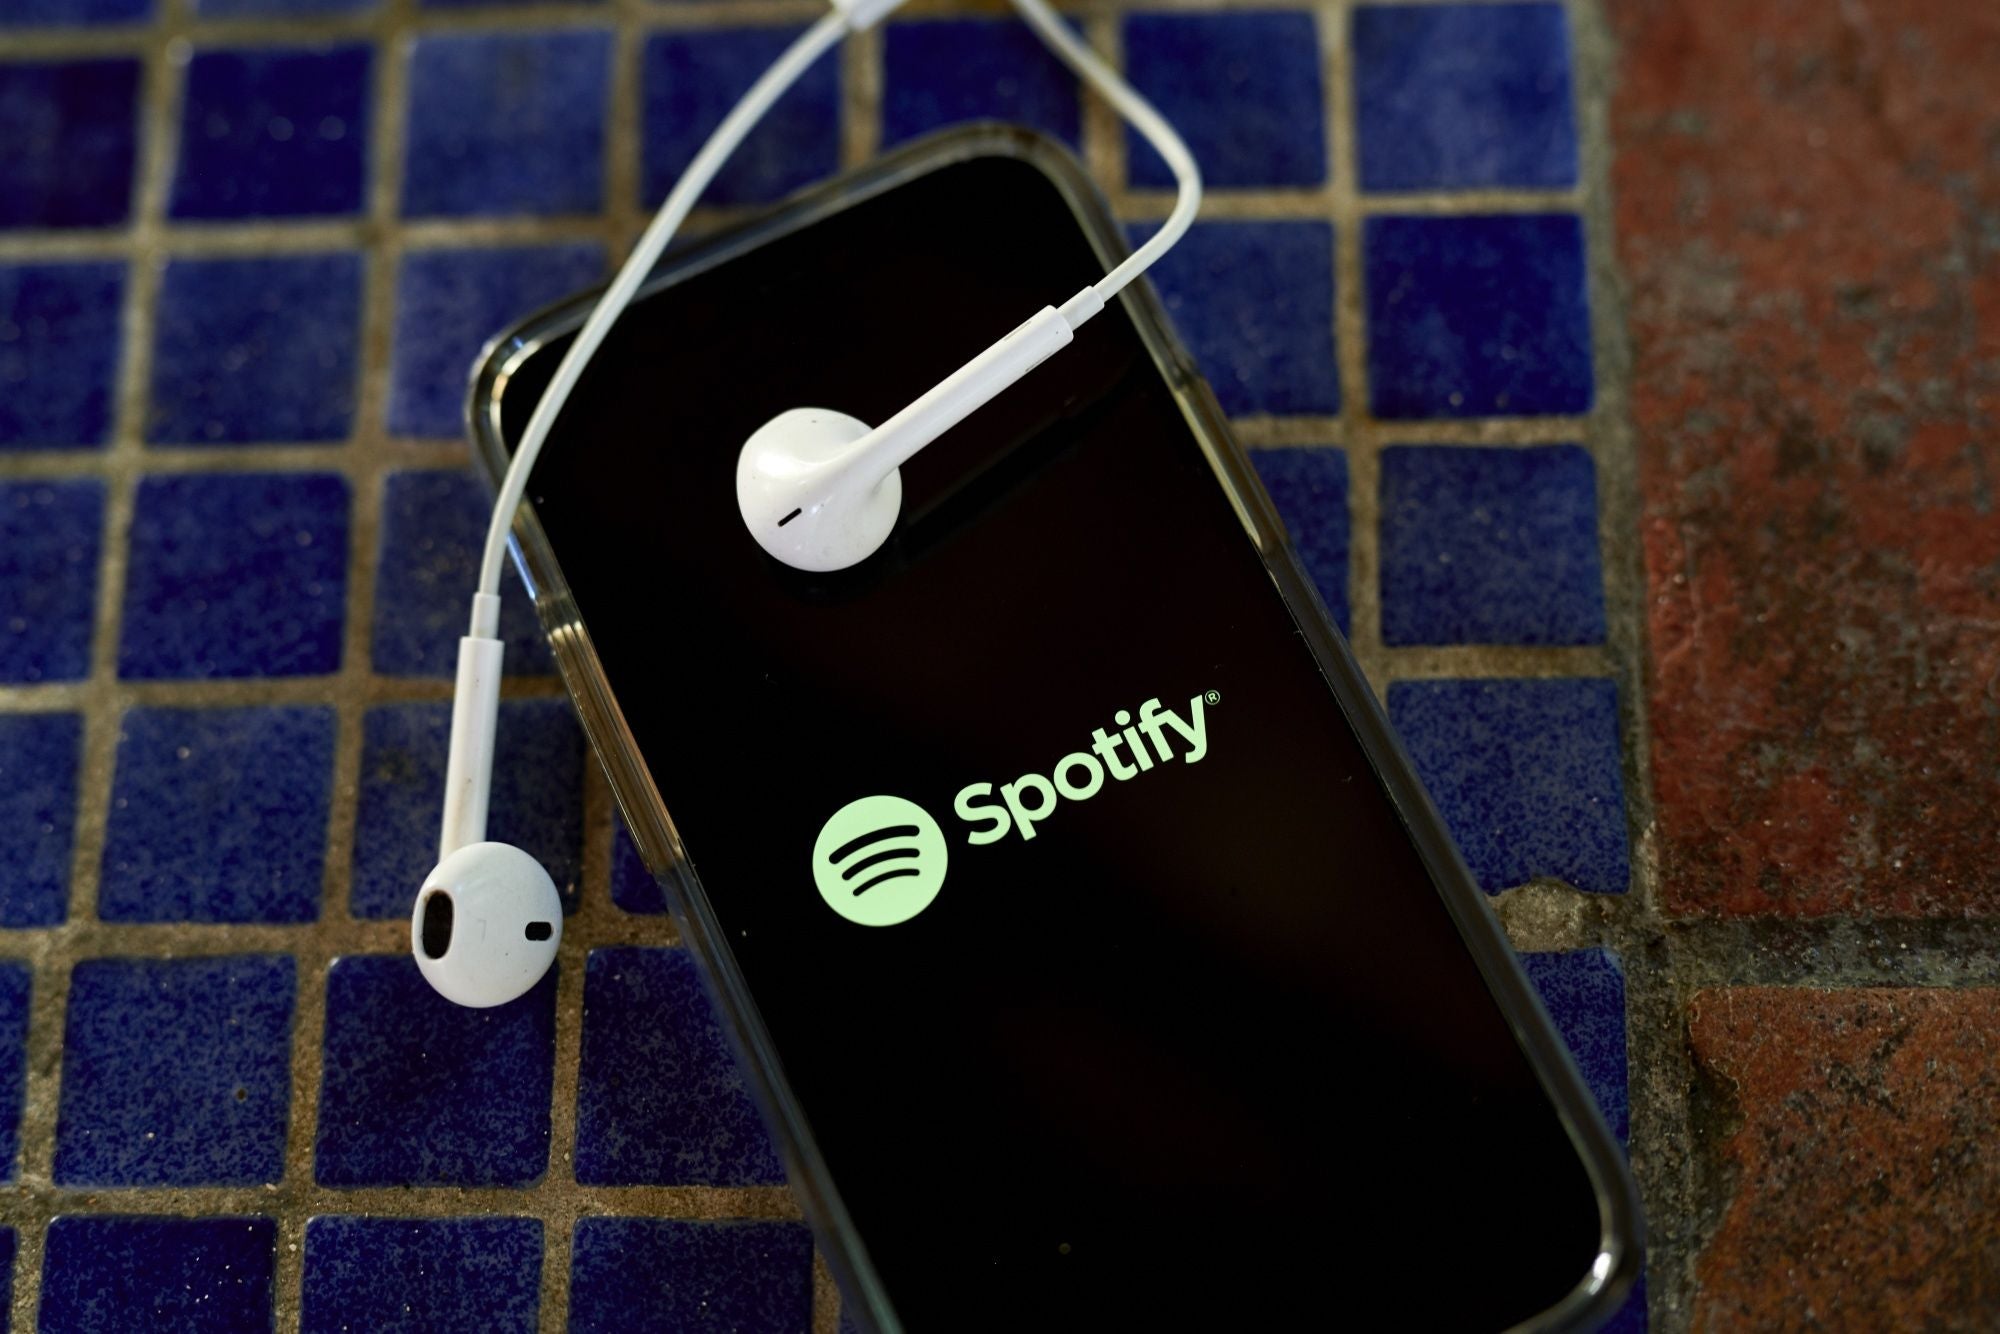 alt = the Spotify logo shown on the screen of a smartphone with white earbuds draped over the phone